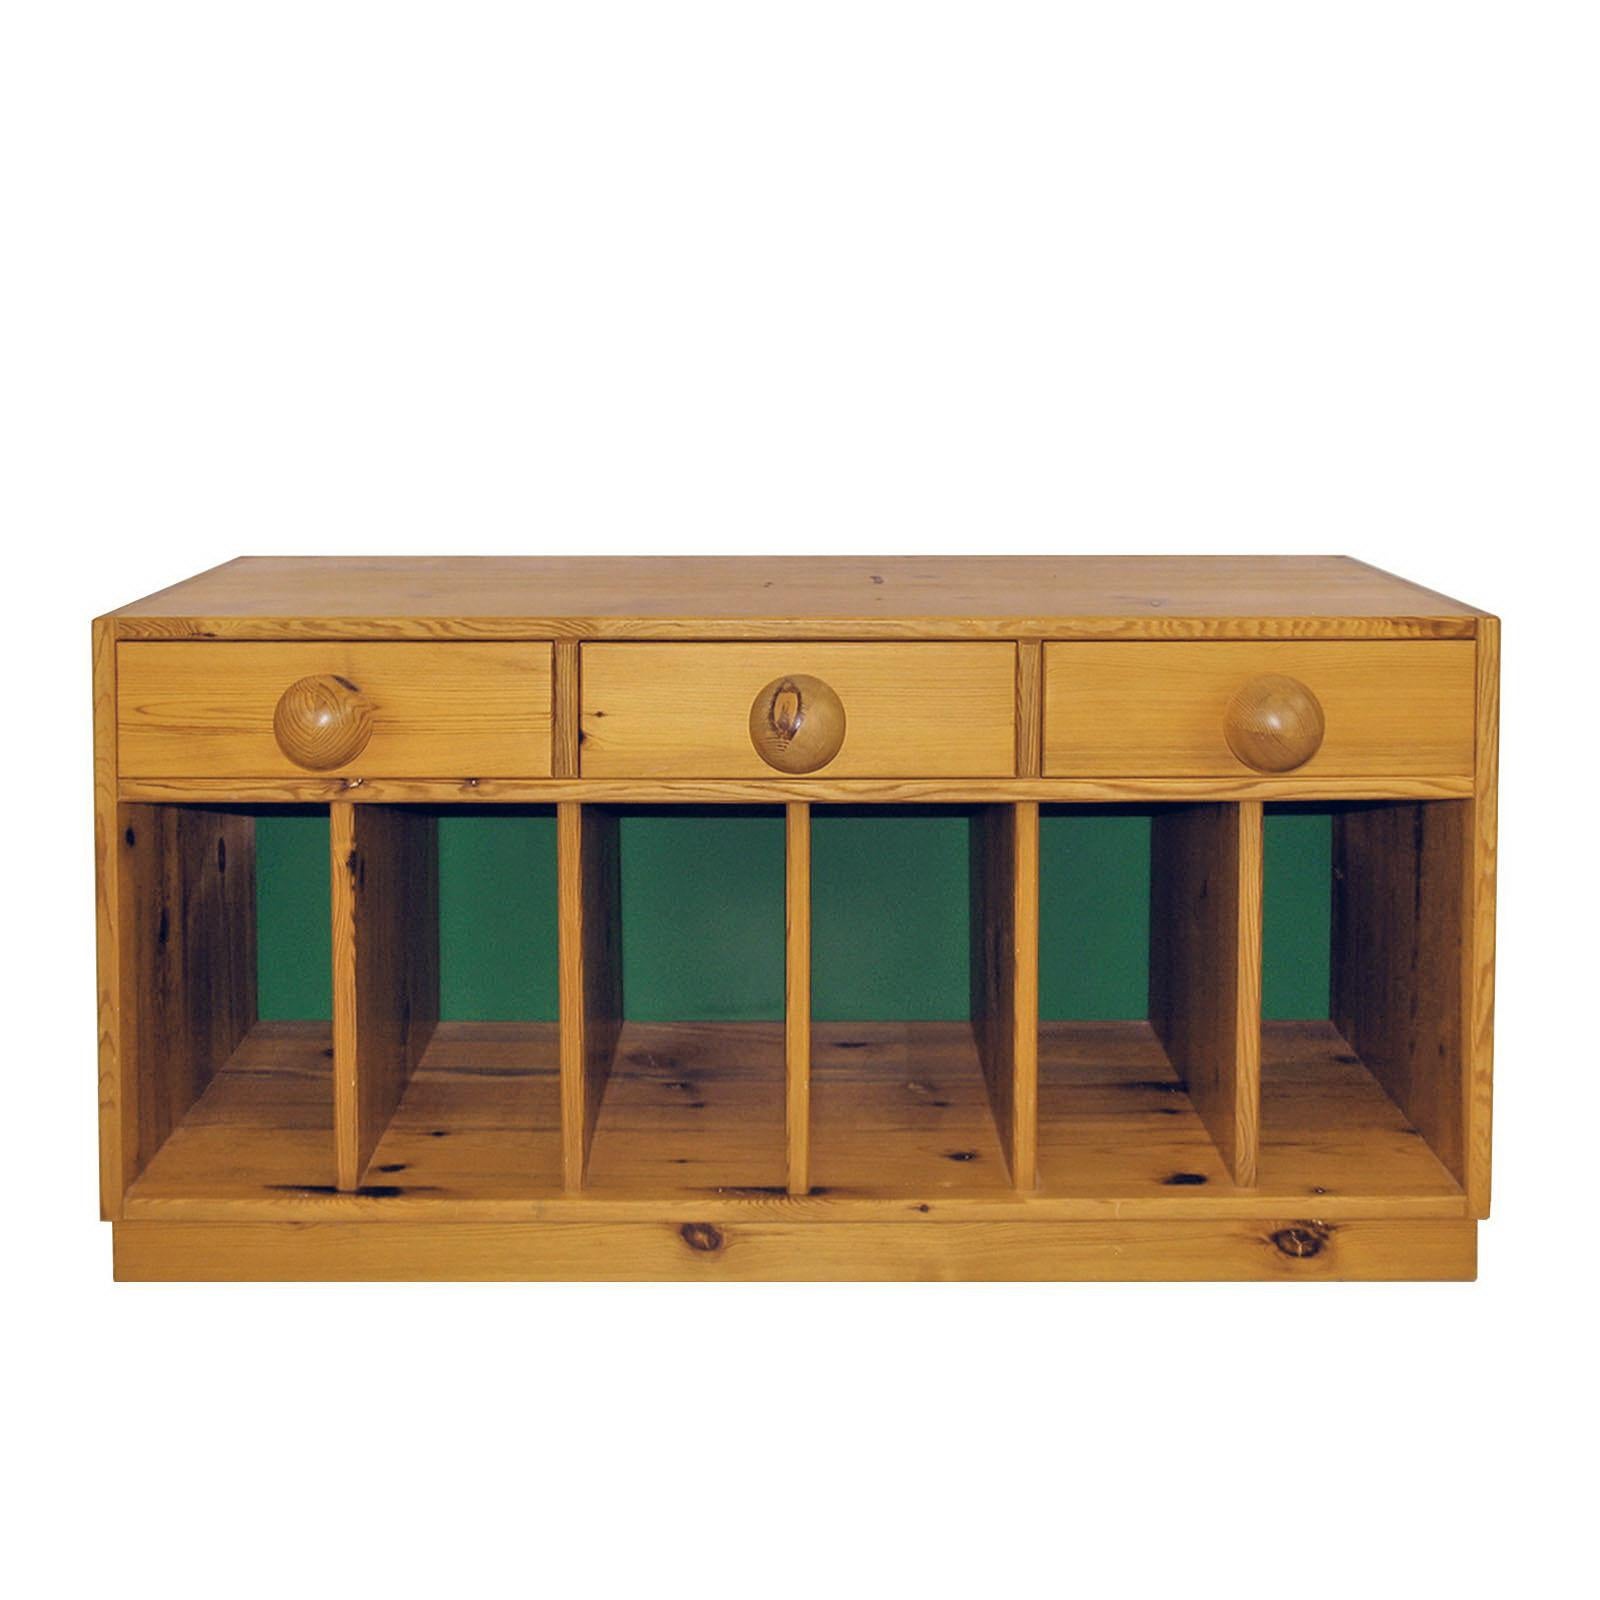 Small Pine Sideboard by Sven Larsson, Sweden 1970s